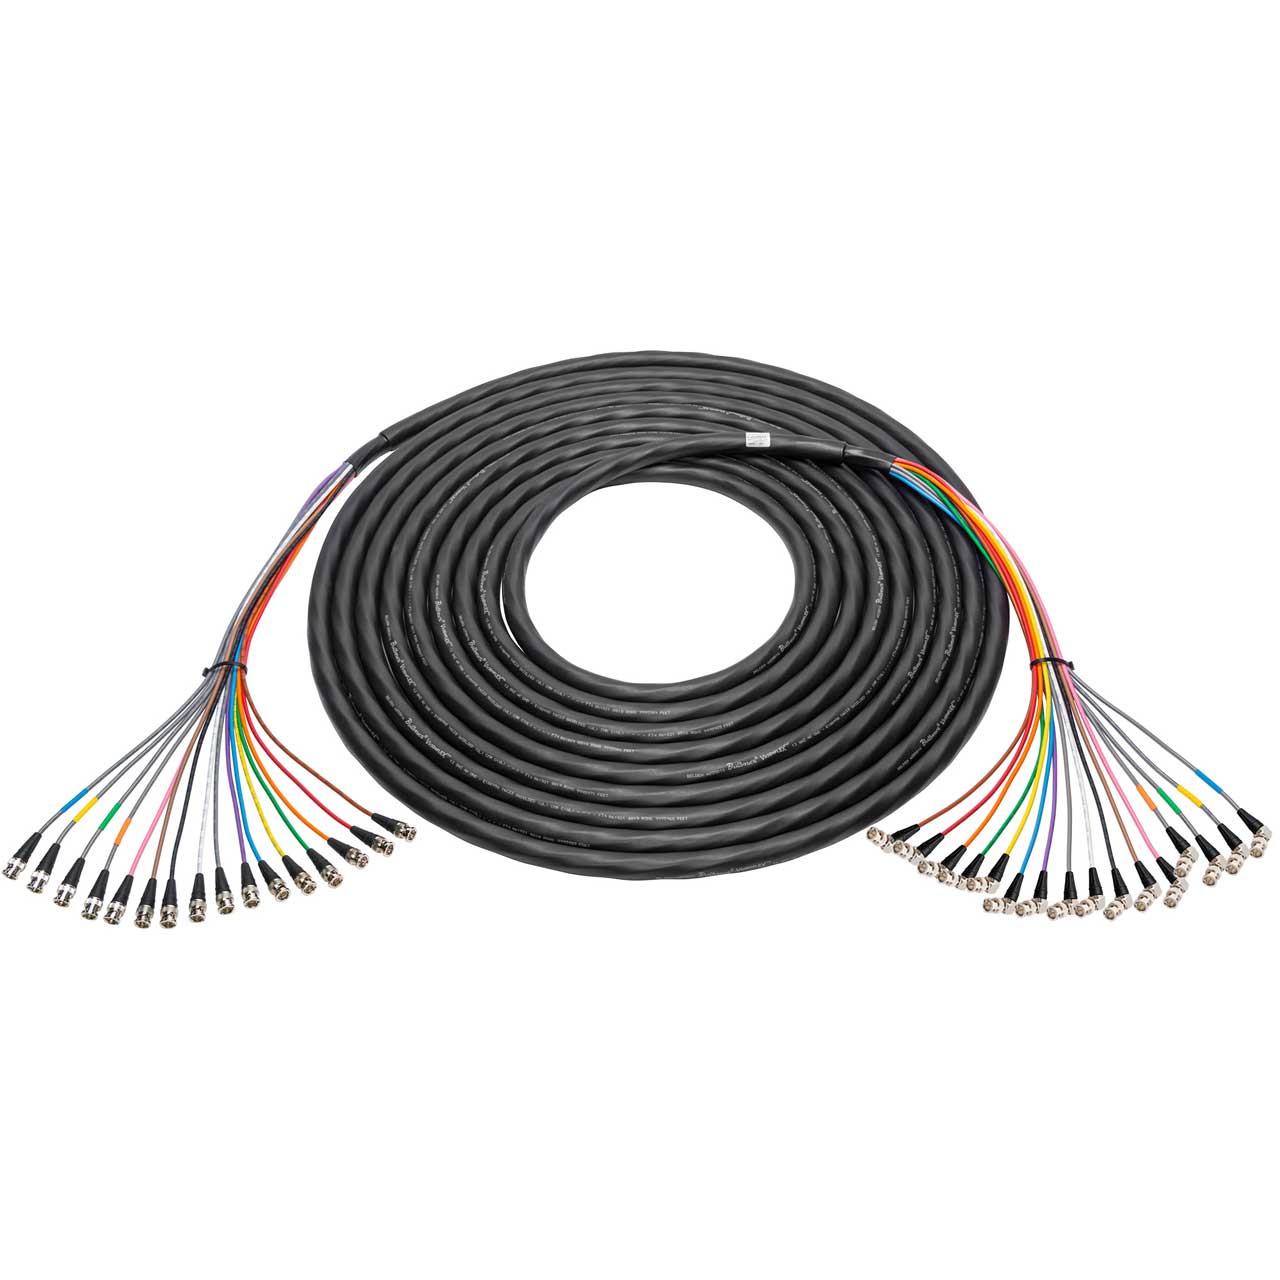 Laird 4855R16-BBA-100 16-Channel 12G-SDI/4K UHD BNC Male to Right Angle BNC Male Snake Cable - 100 Foot 4855R16-BBA-100